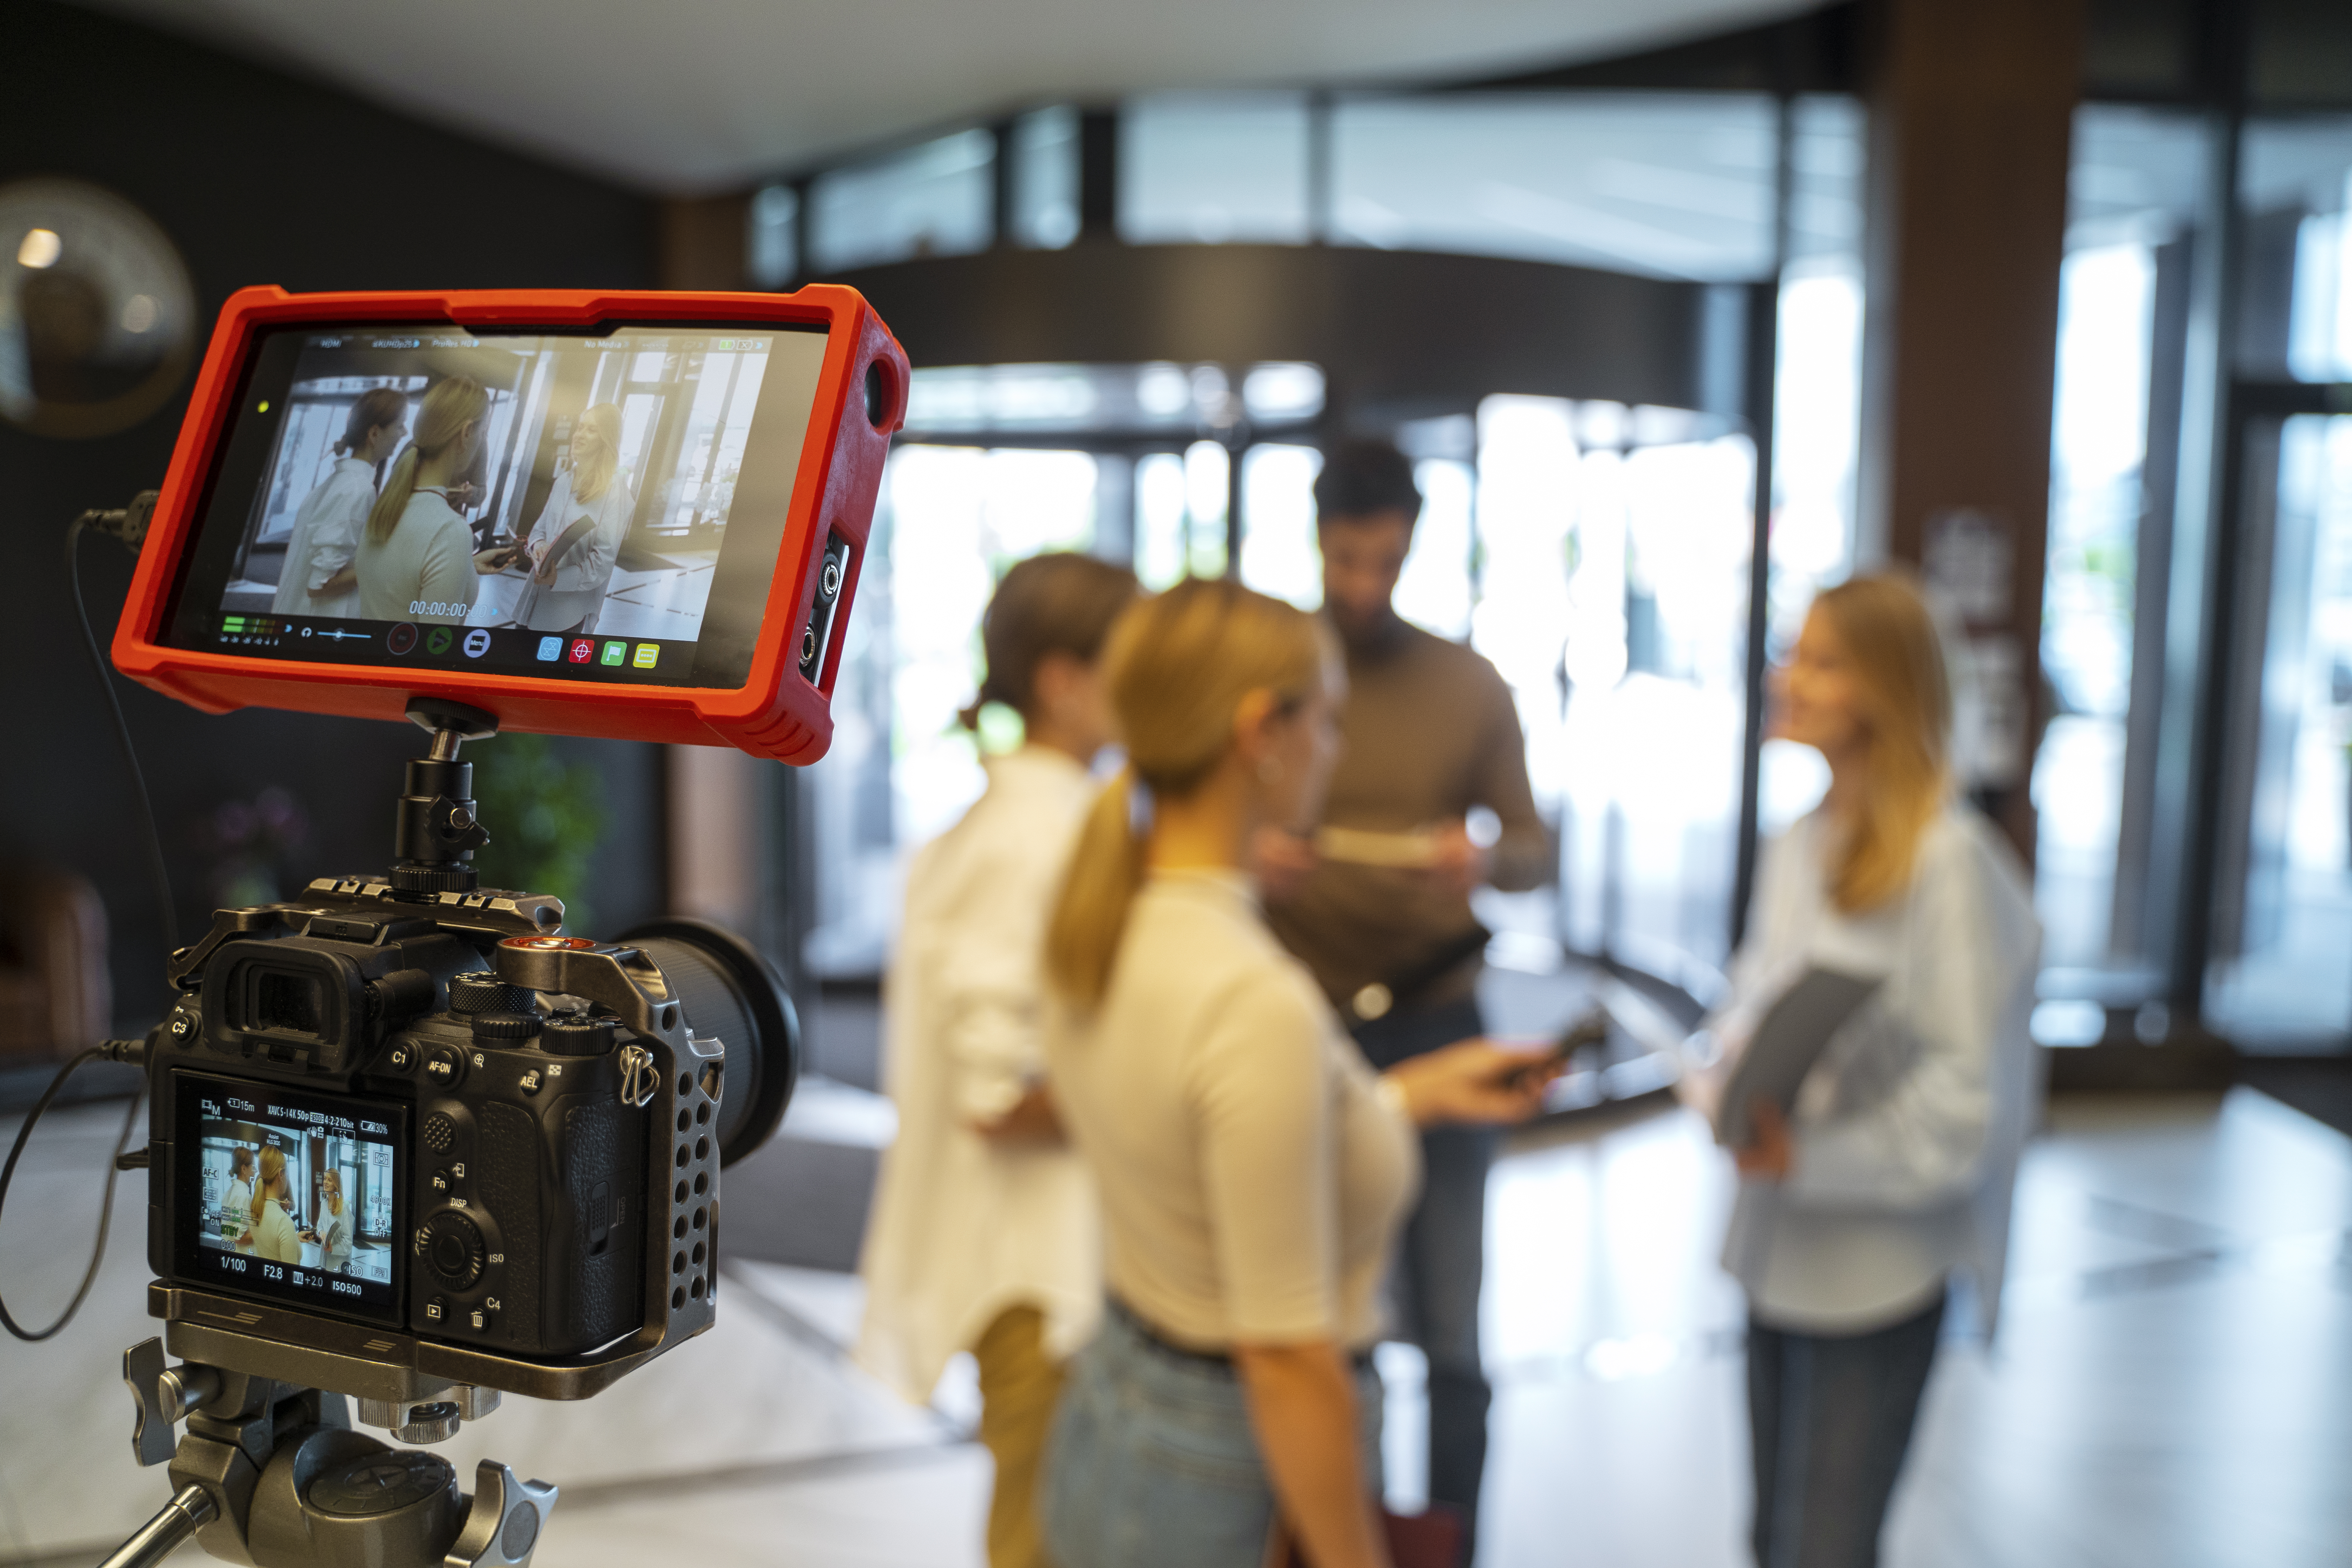 Why has video become the communication format of today and tomorrow?